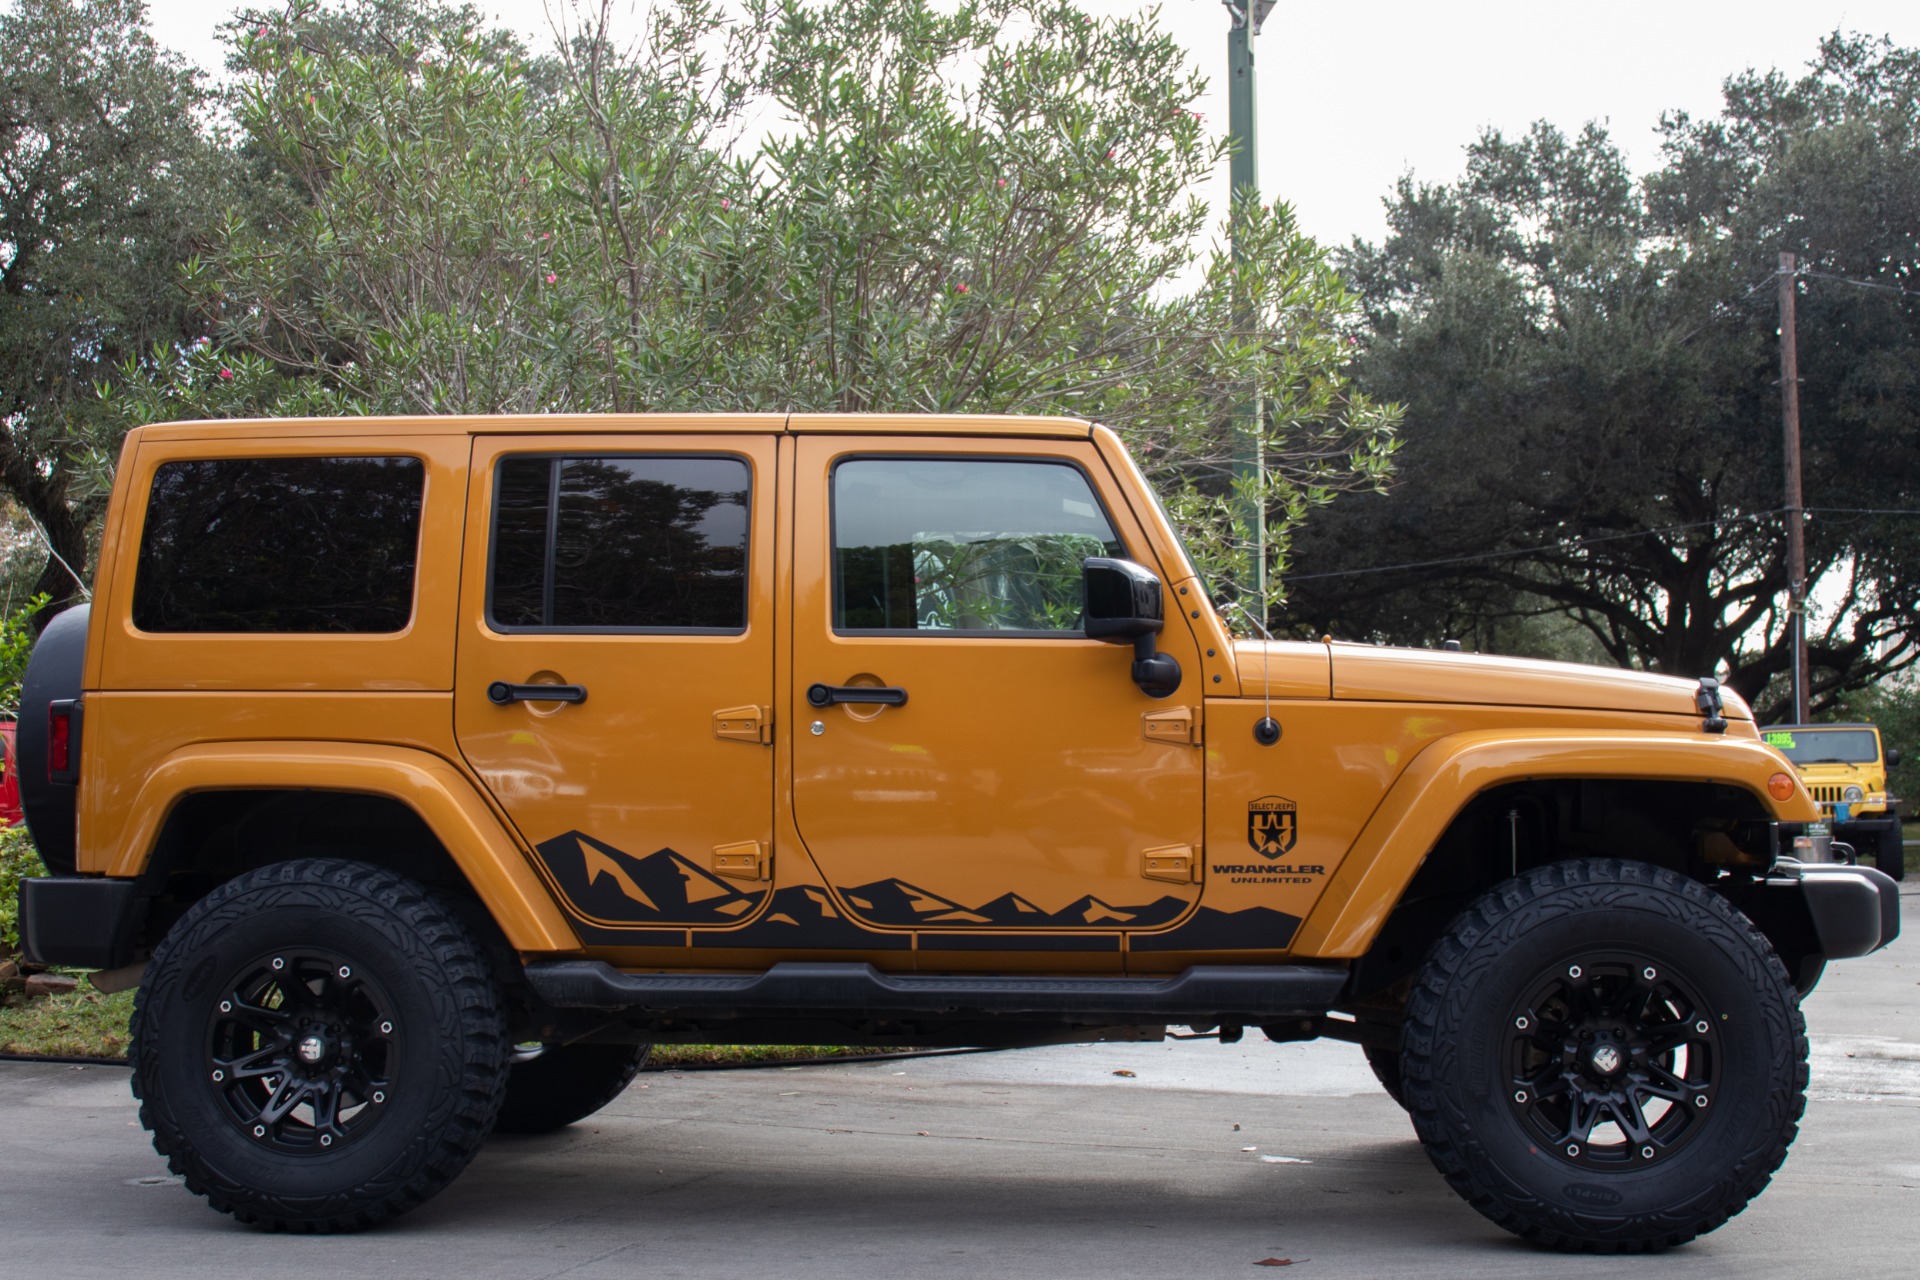 Used 2014 Jeep Wrangler Unlimited Altitude Edition For Sale ($29,995) |  Select Jeeps Inc. Stock #261789